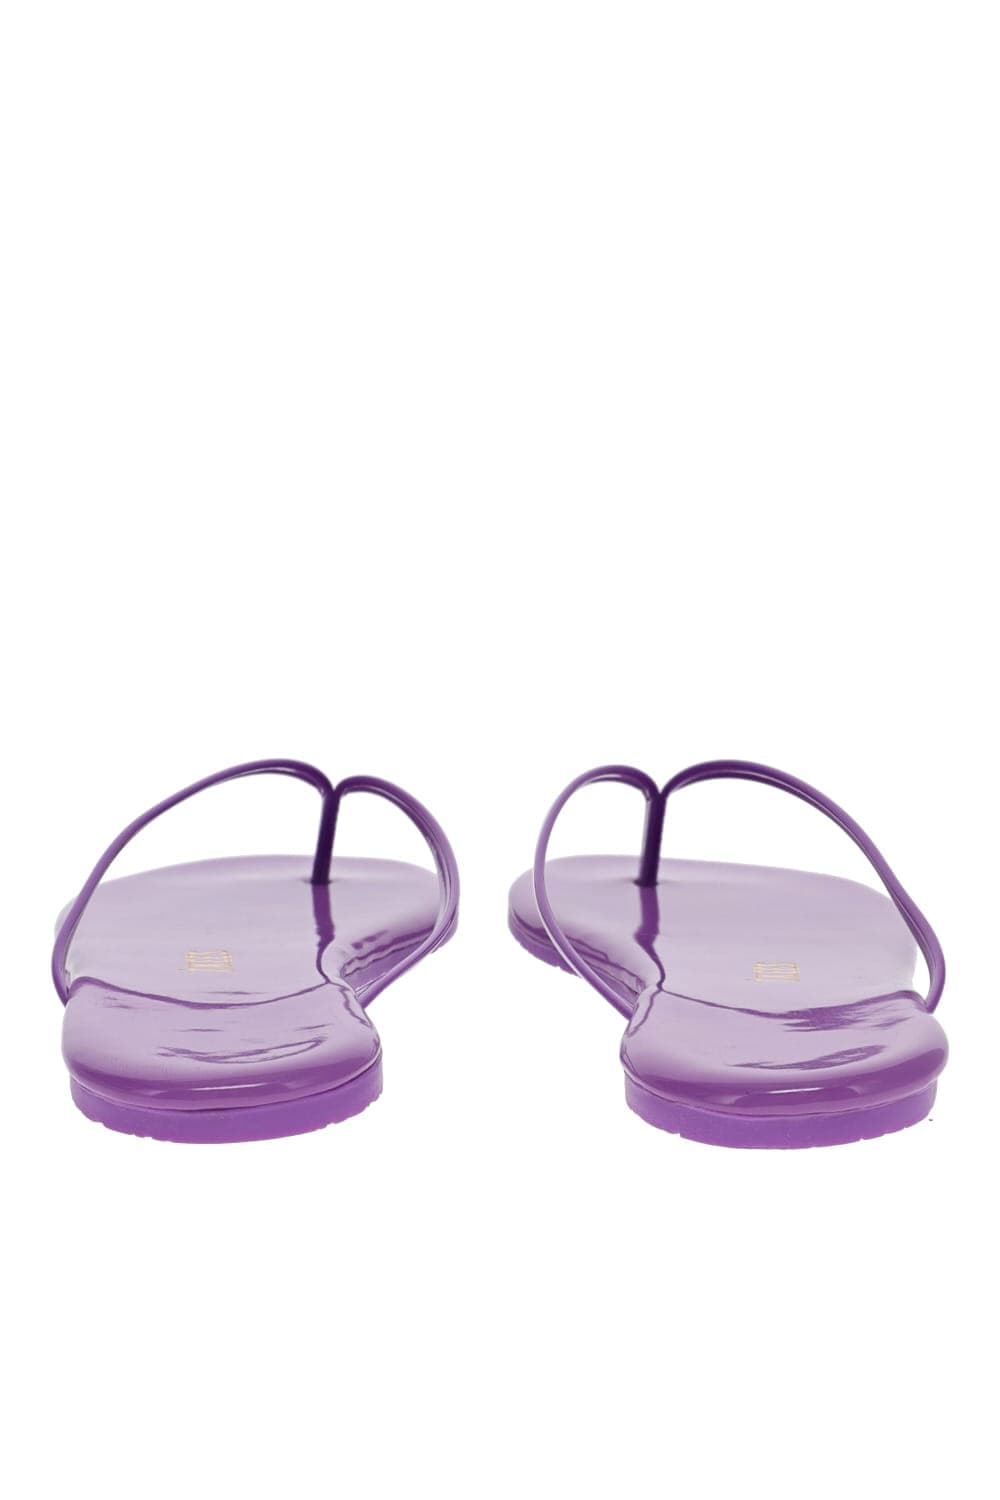 TKEES Lily Patent Solids LILP-01 Bright Lavendar